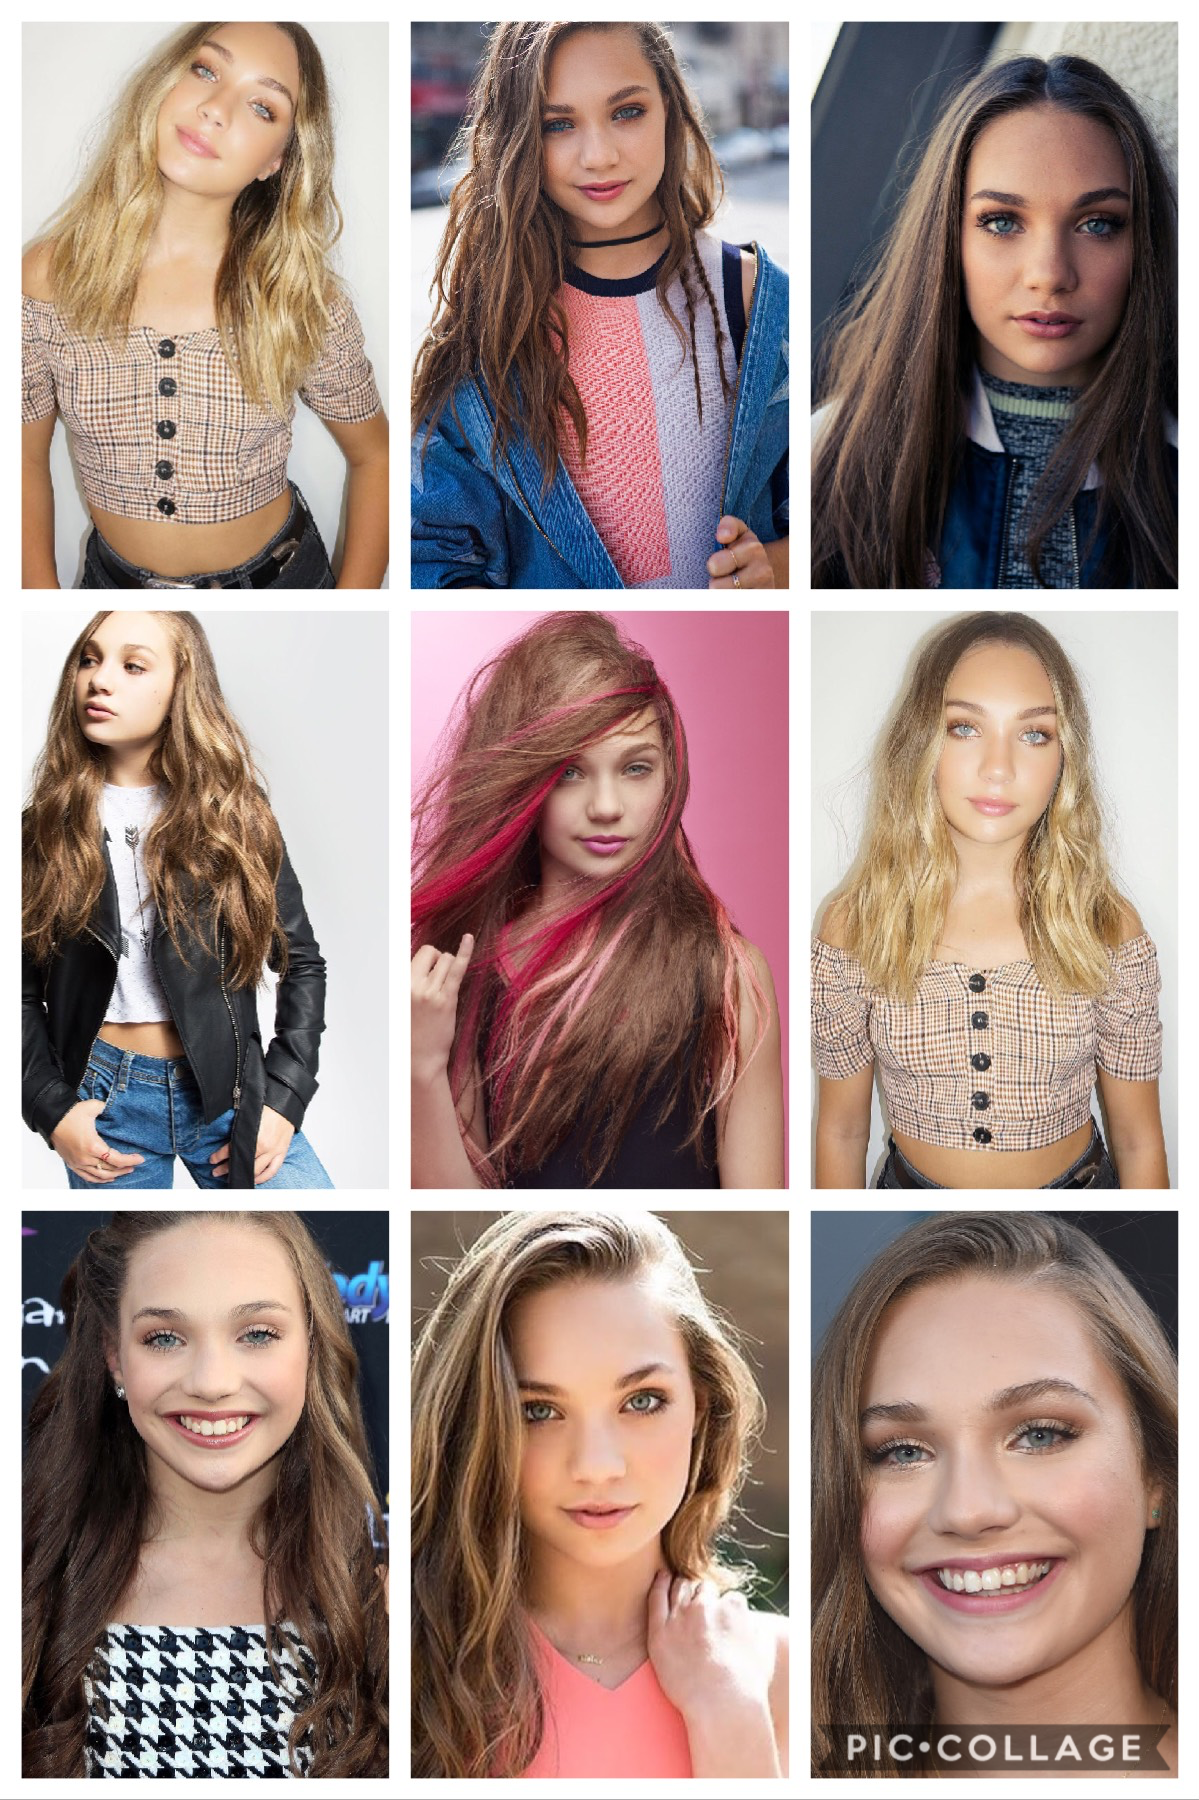 If you like Maddie Ziegler then like this pic collage 